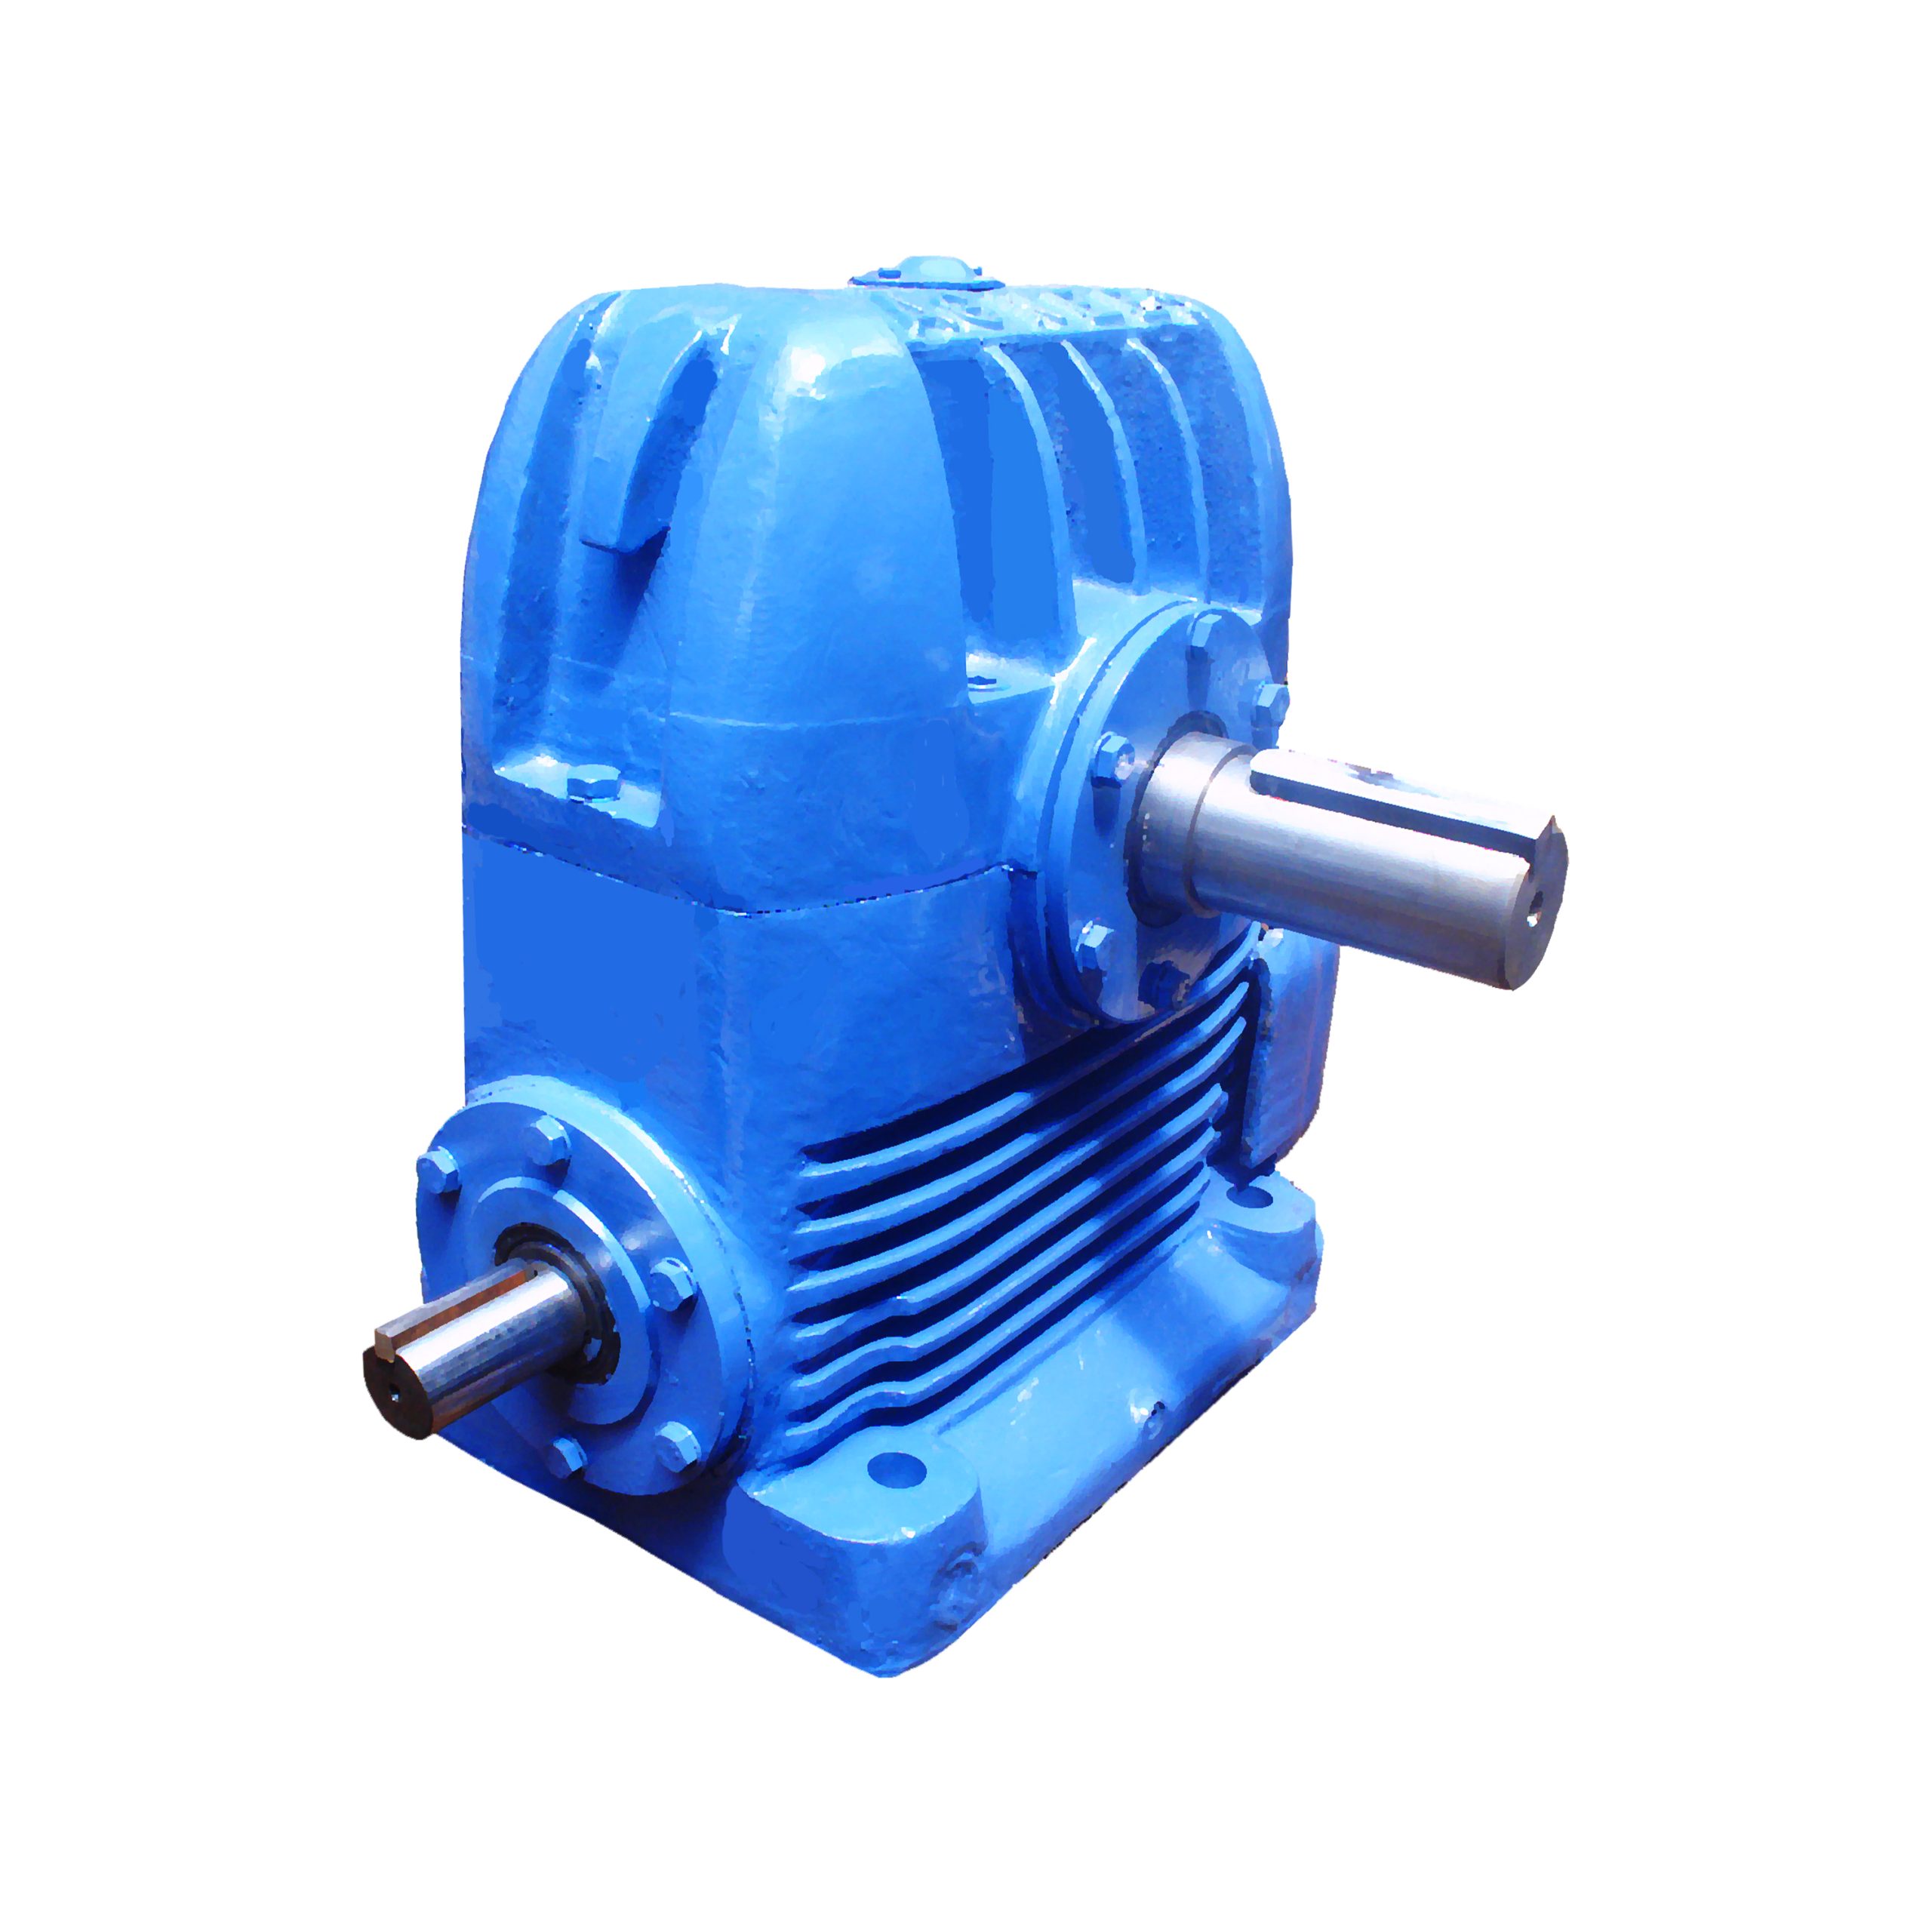 WORM Vertical Gear Box, For Industrial, Packaging Type: Standard